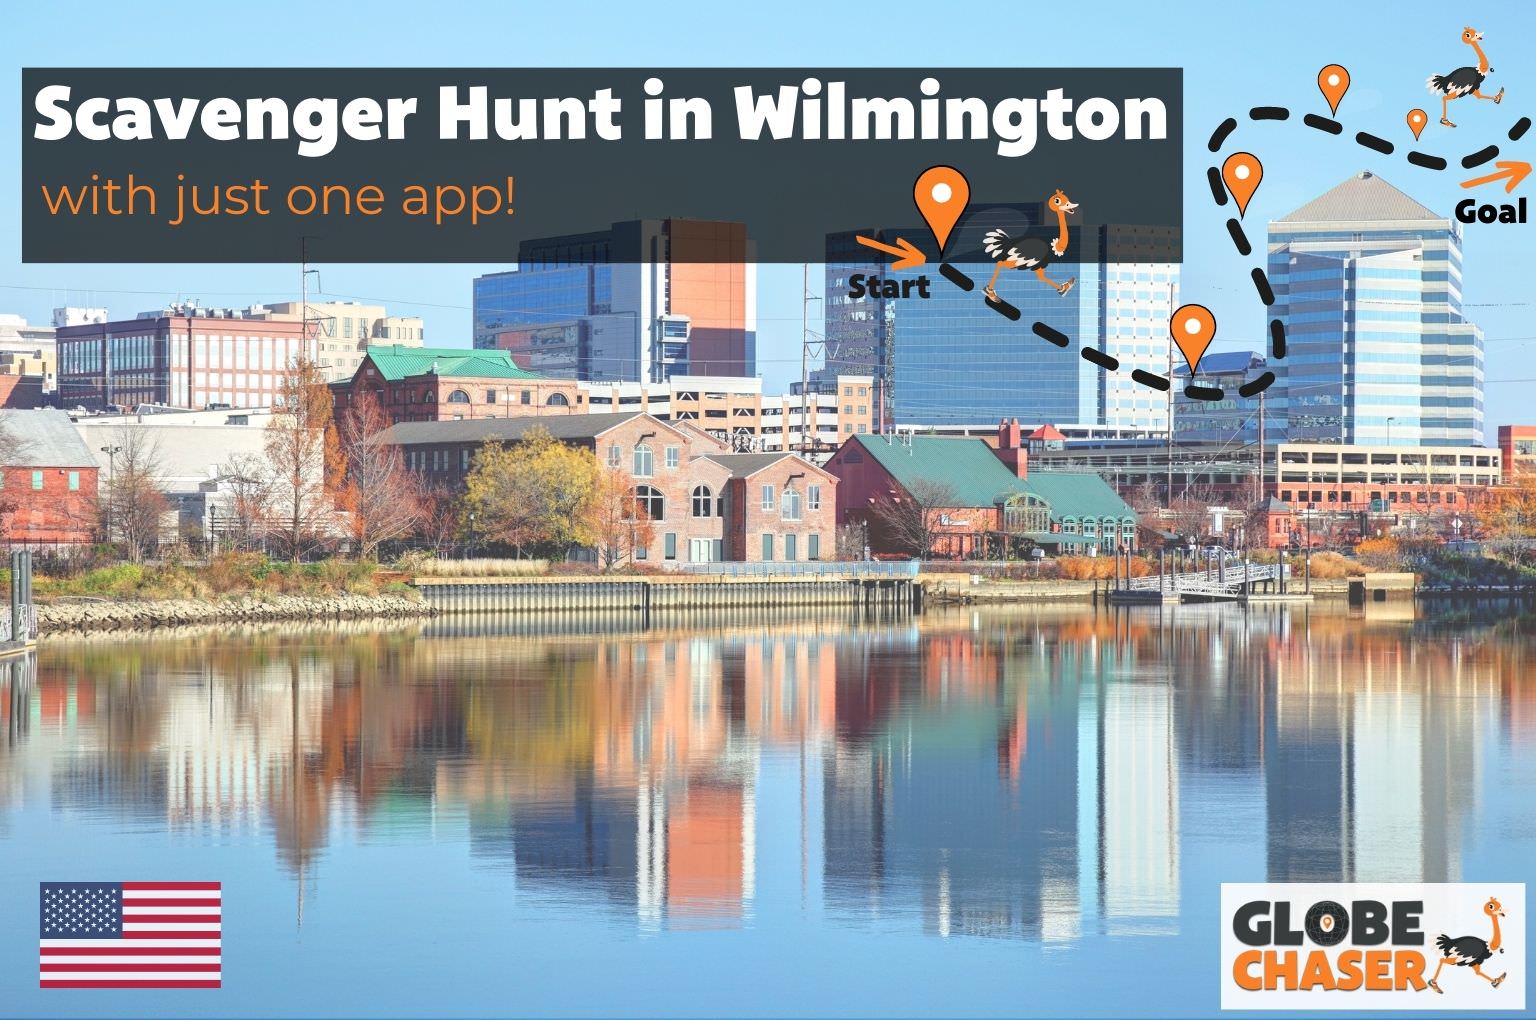 Scavenger Hunt in Wilmington, USA - Family Activities with the Globe Chaser App for Outdoor Fun